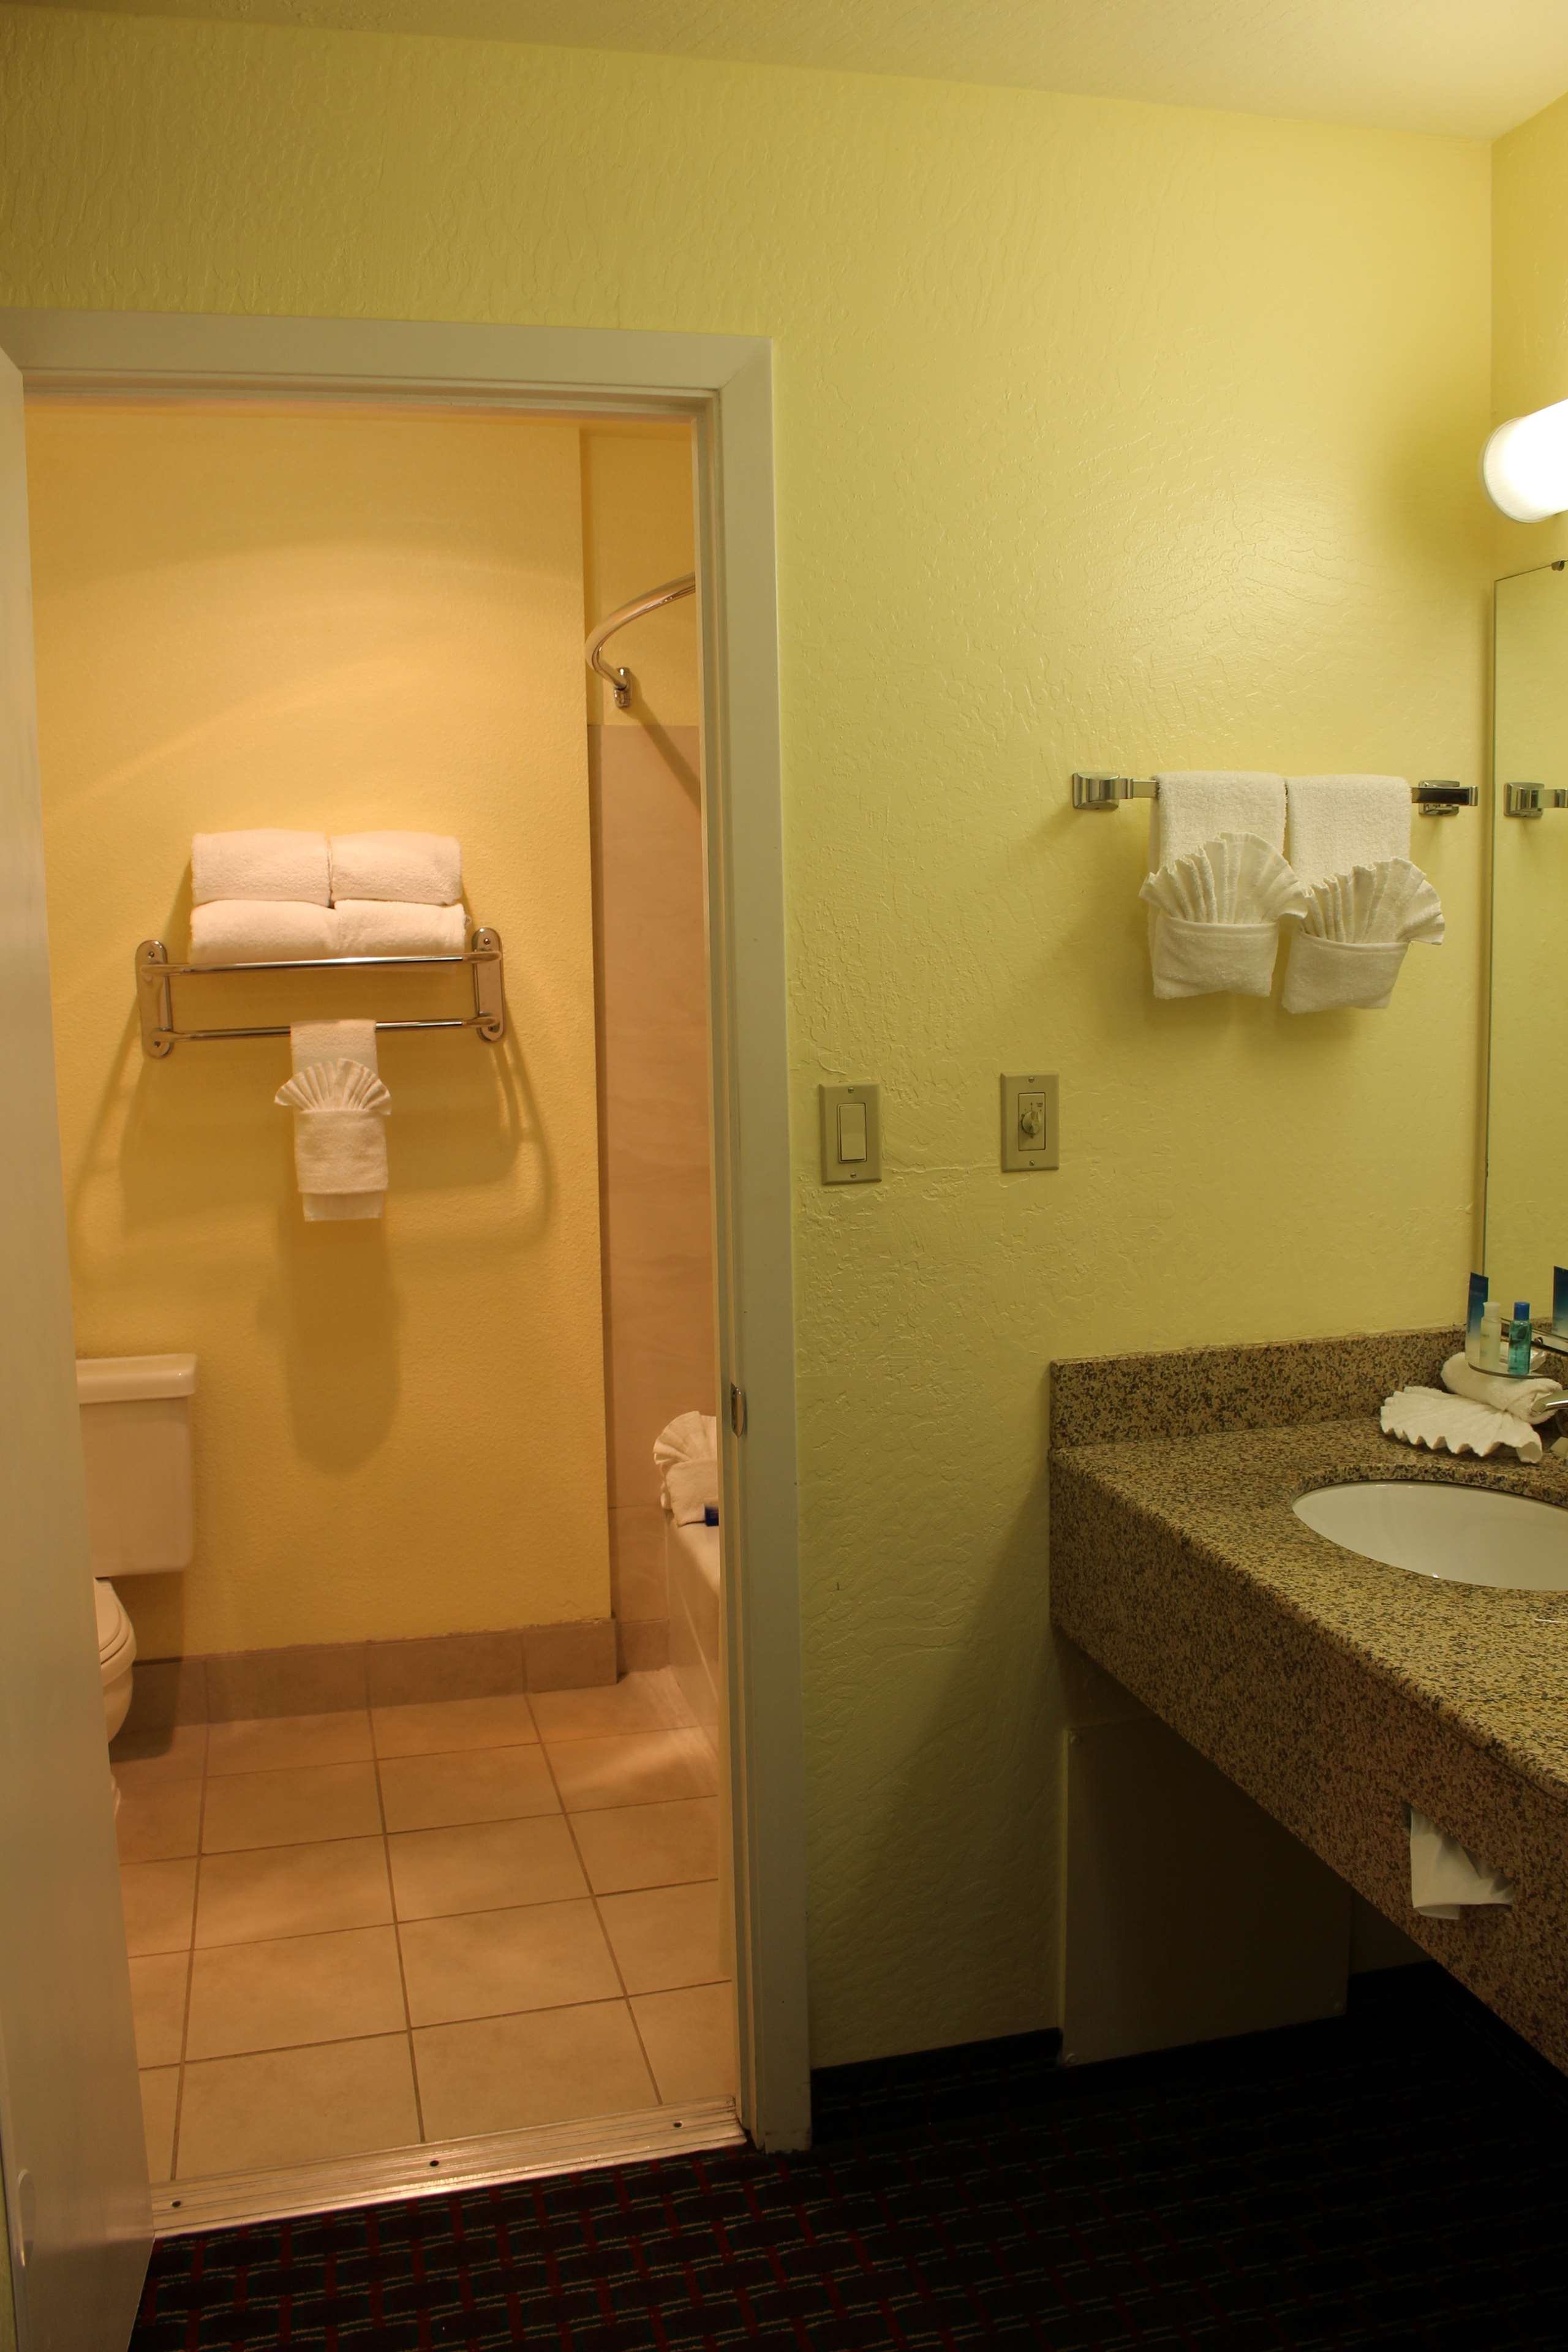 Best Western Plus Sonora Oaks Hotel & Conference Center Photo